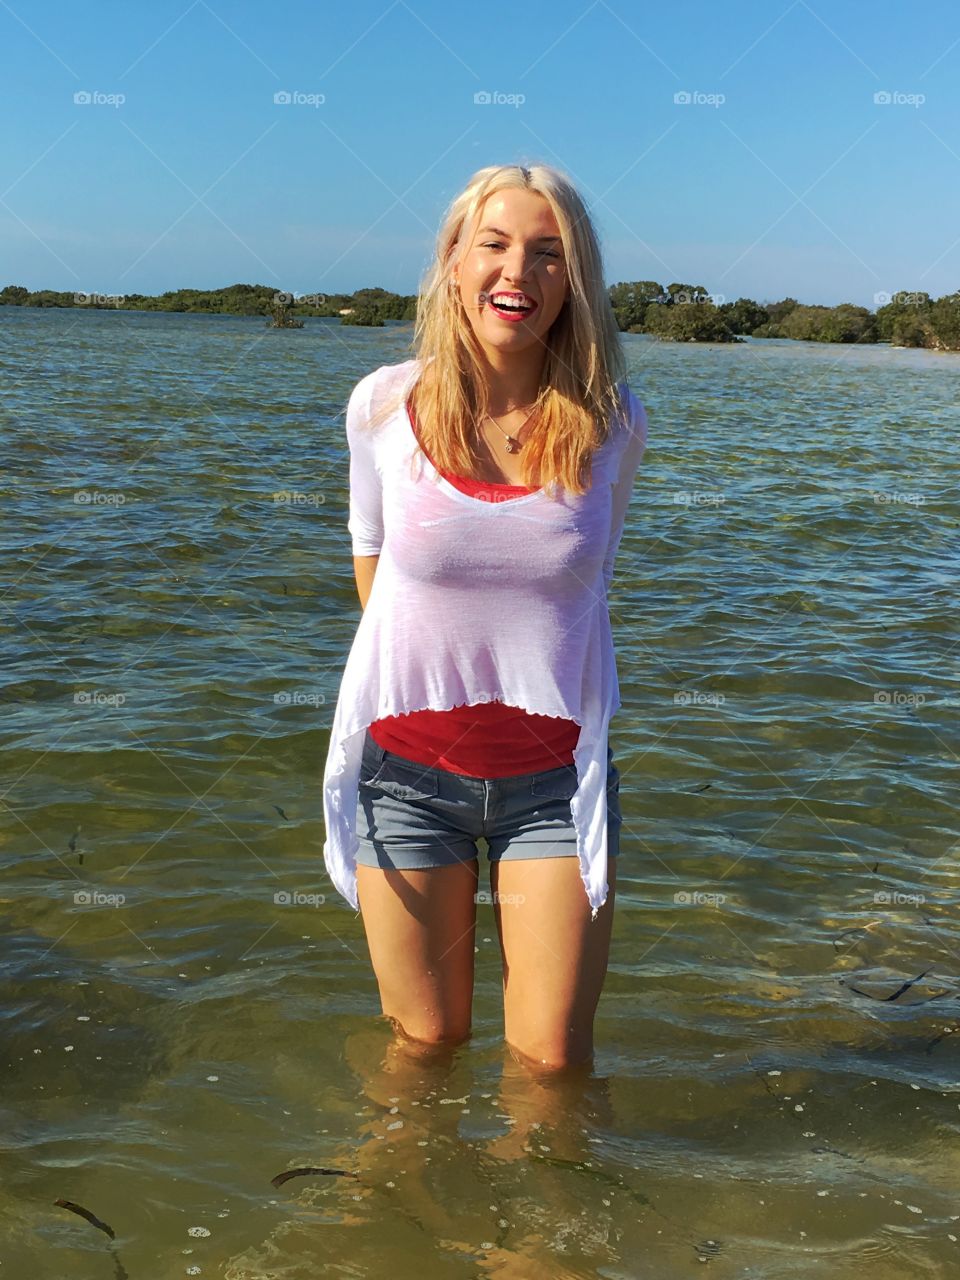 Smiling young woman standing in water